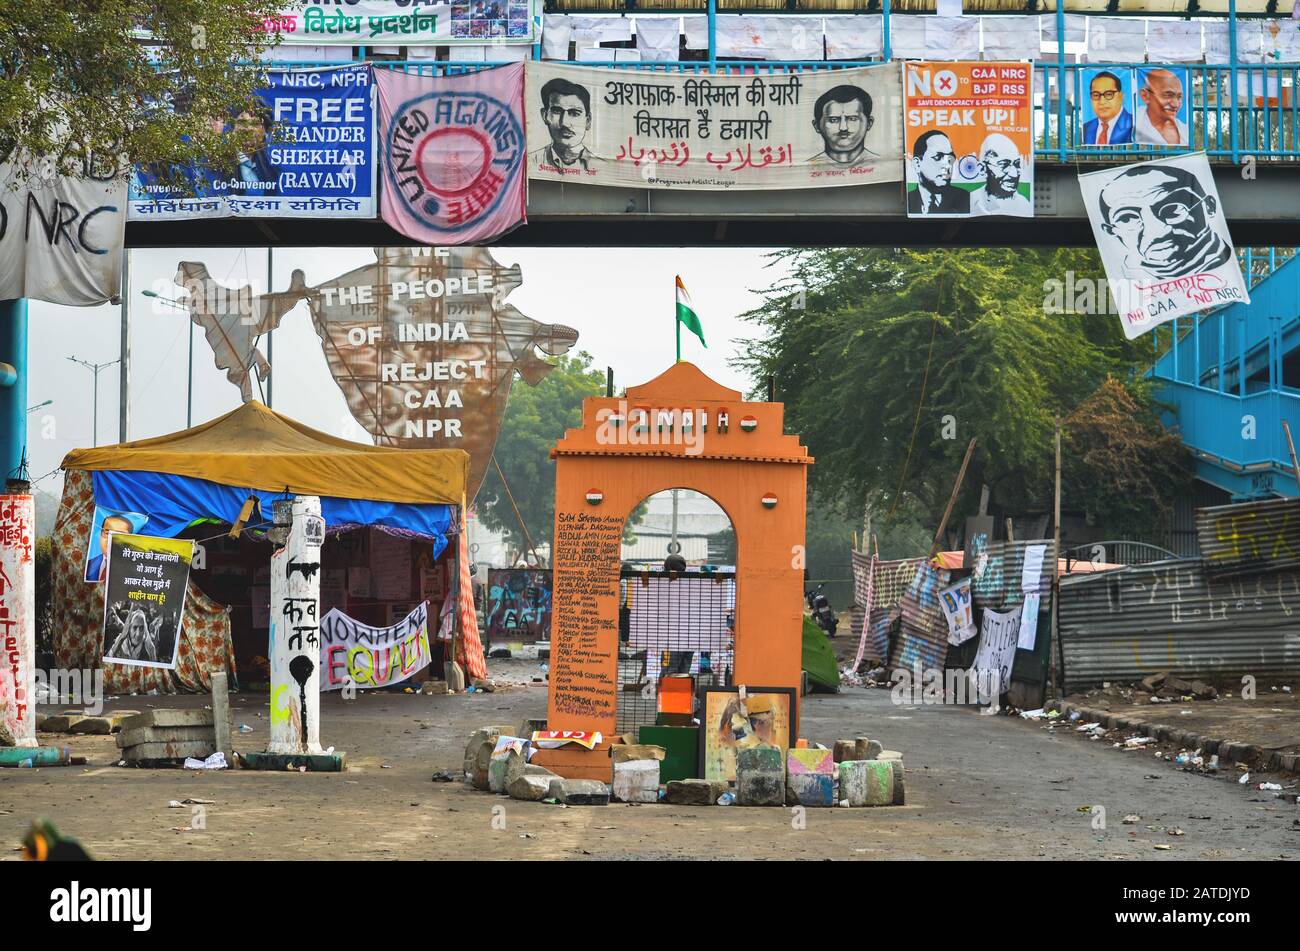 Women Protest against CAA & NRC, Shaheen Bagh, New Delhi, India- January 17, 2020: Replica of India gate at the protest venue, Shaheen Bagh, New Delhi Stock Photo